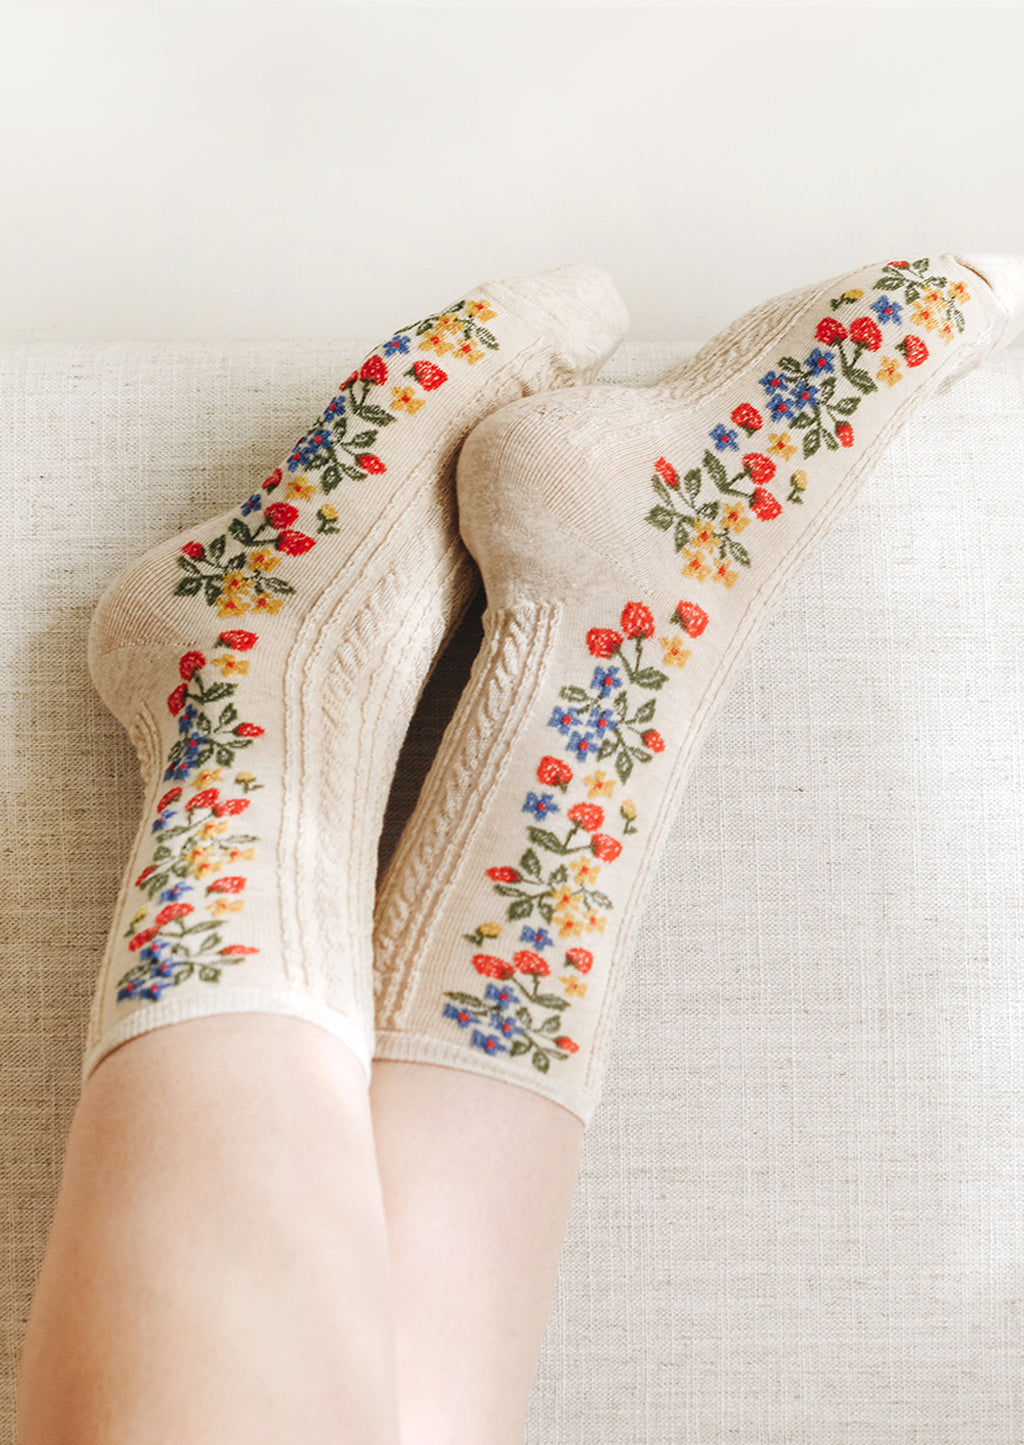 3: A pair of oatmeal colored socks with primary color strawberry print.